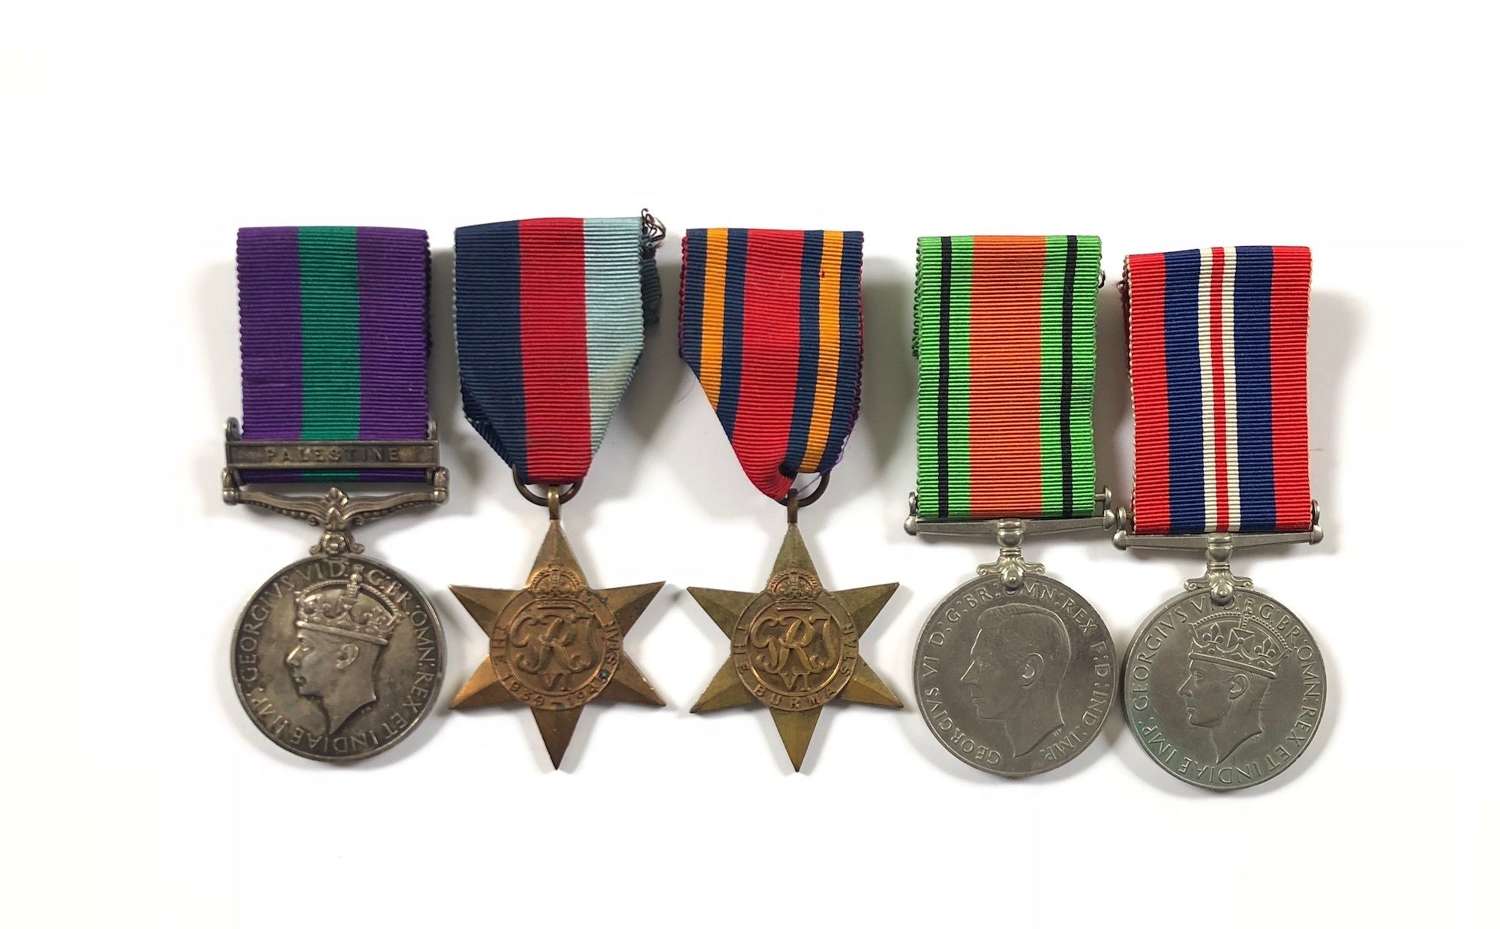 Queen’s Regiment General Service Medal Clasp Palestine Group of Medals